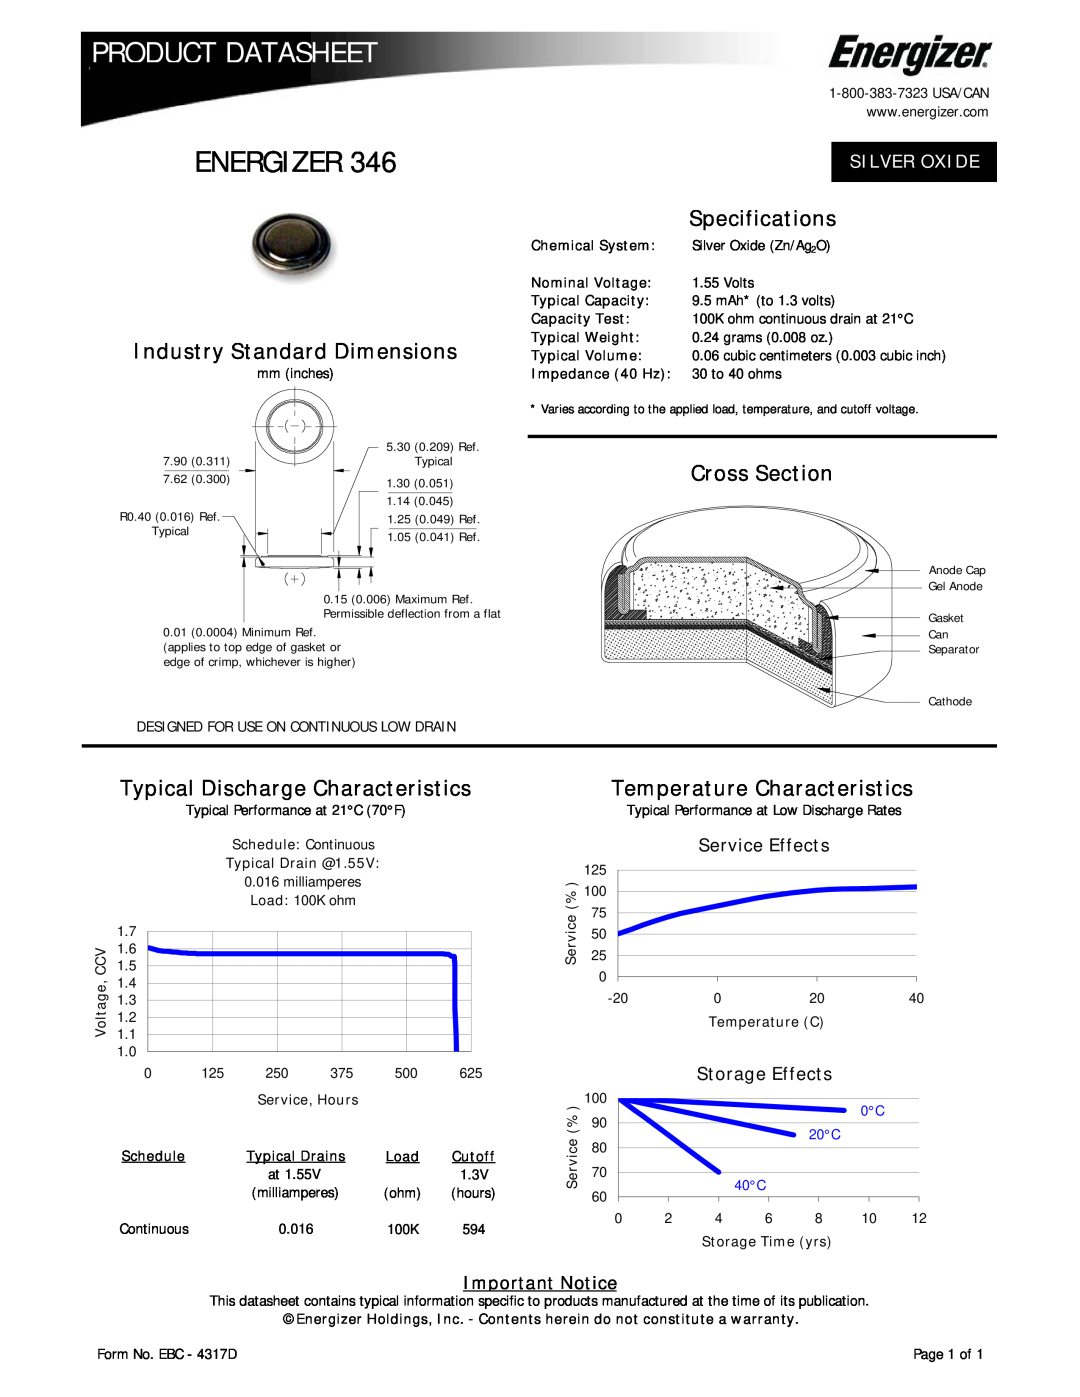 Energizer 346 specifications Product Datasheet, Energizer, Industry Standard Dimensions, Specifications, Cross Section 